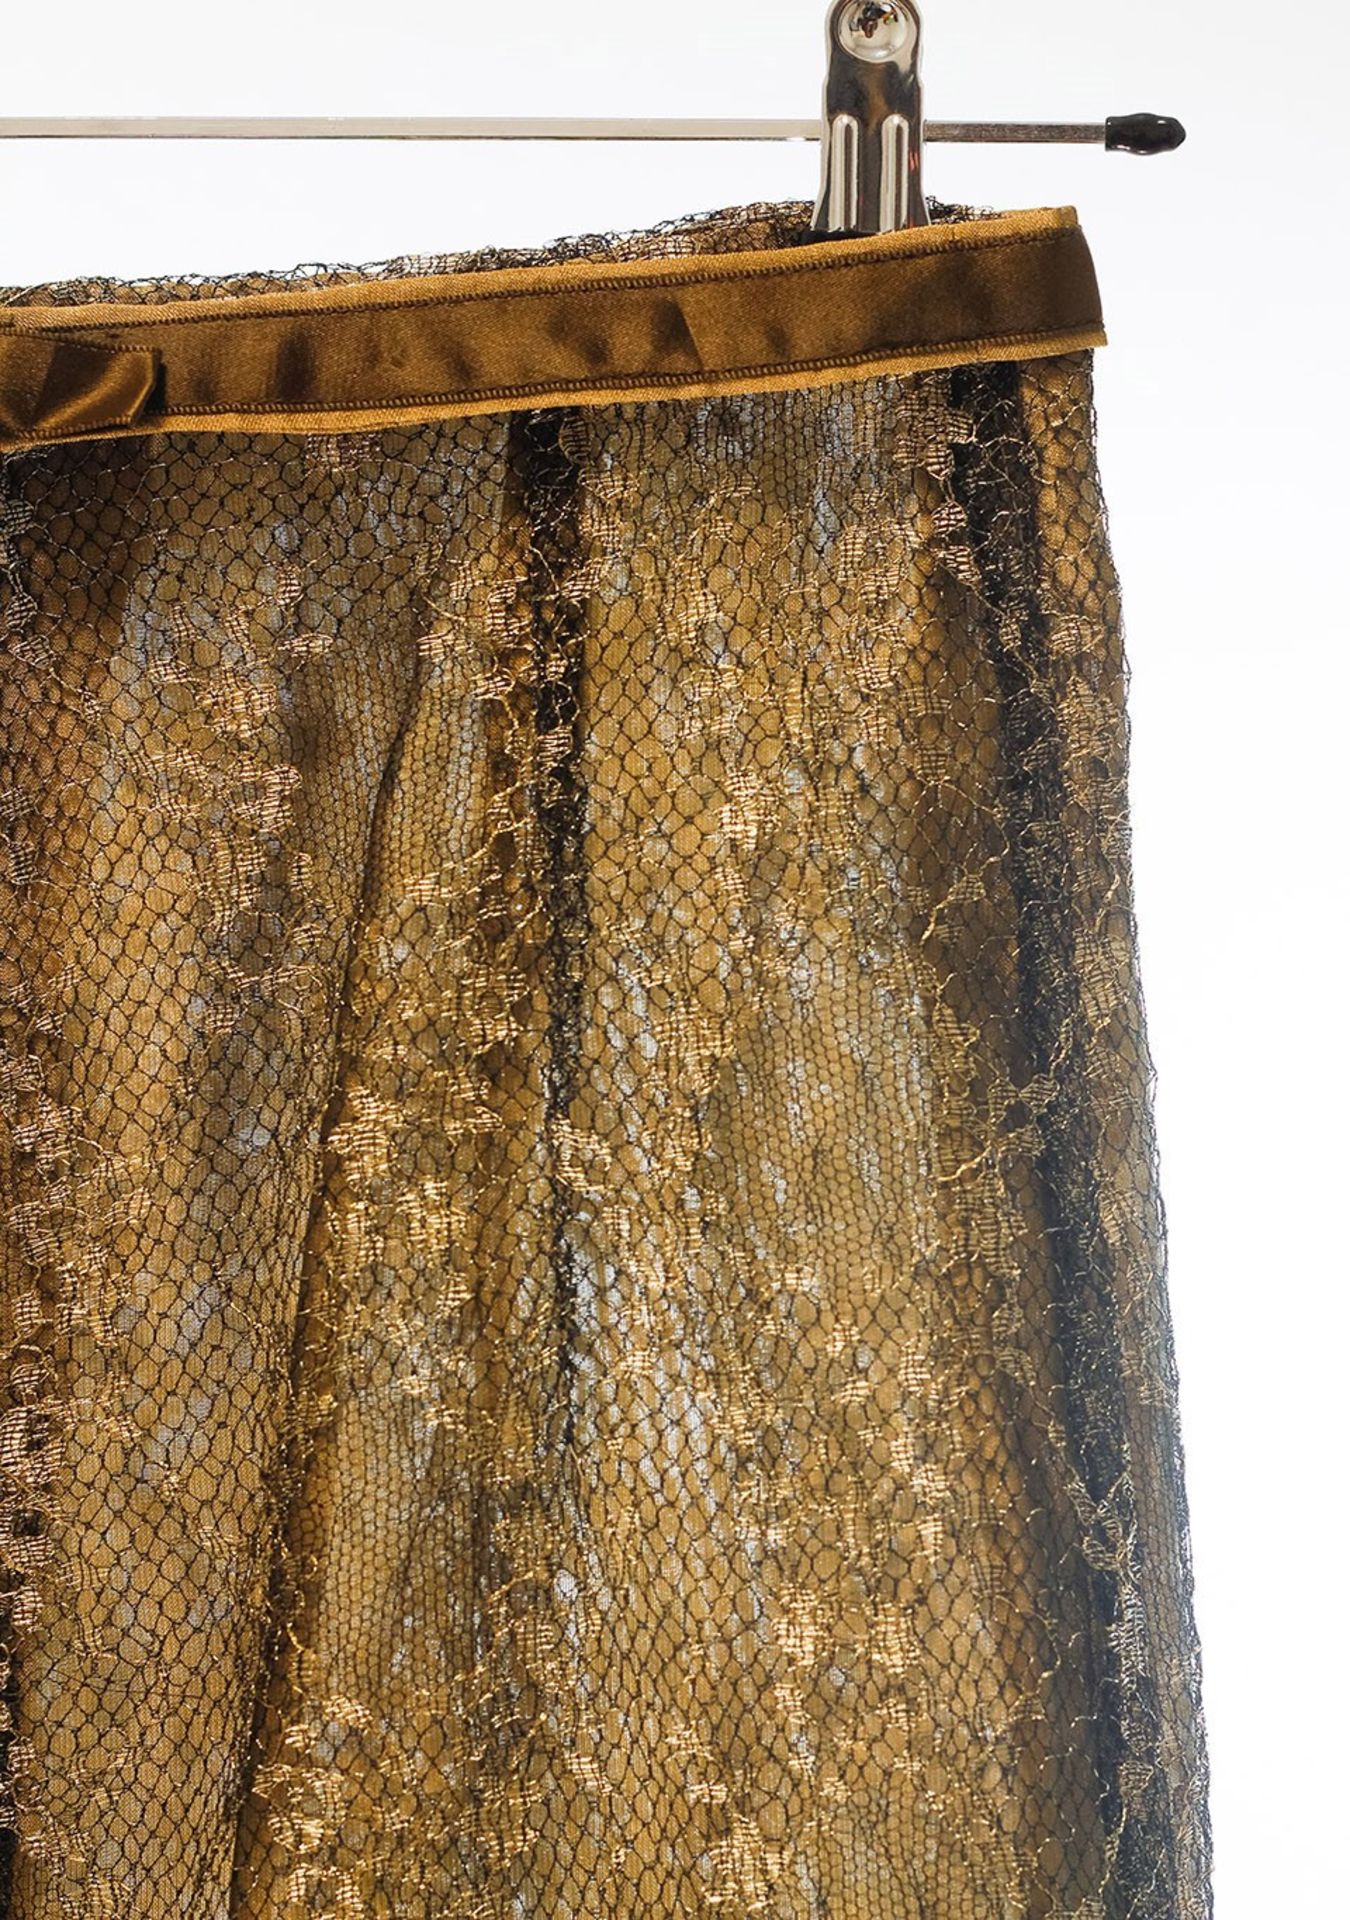 1 x Boutique Le Duc Olive Green Skirt - From a High End Clothing Boutique In The - Image 3 of 8